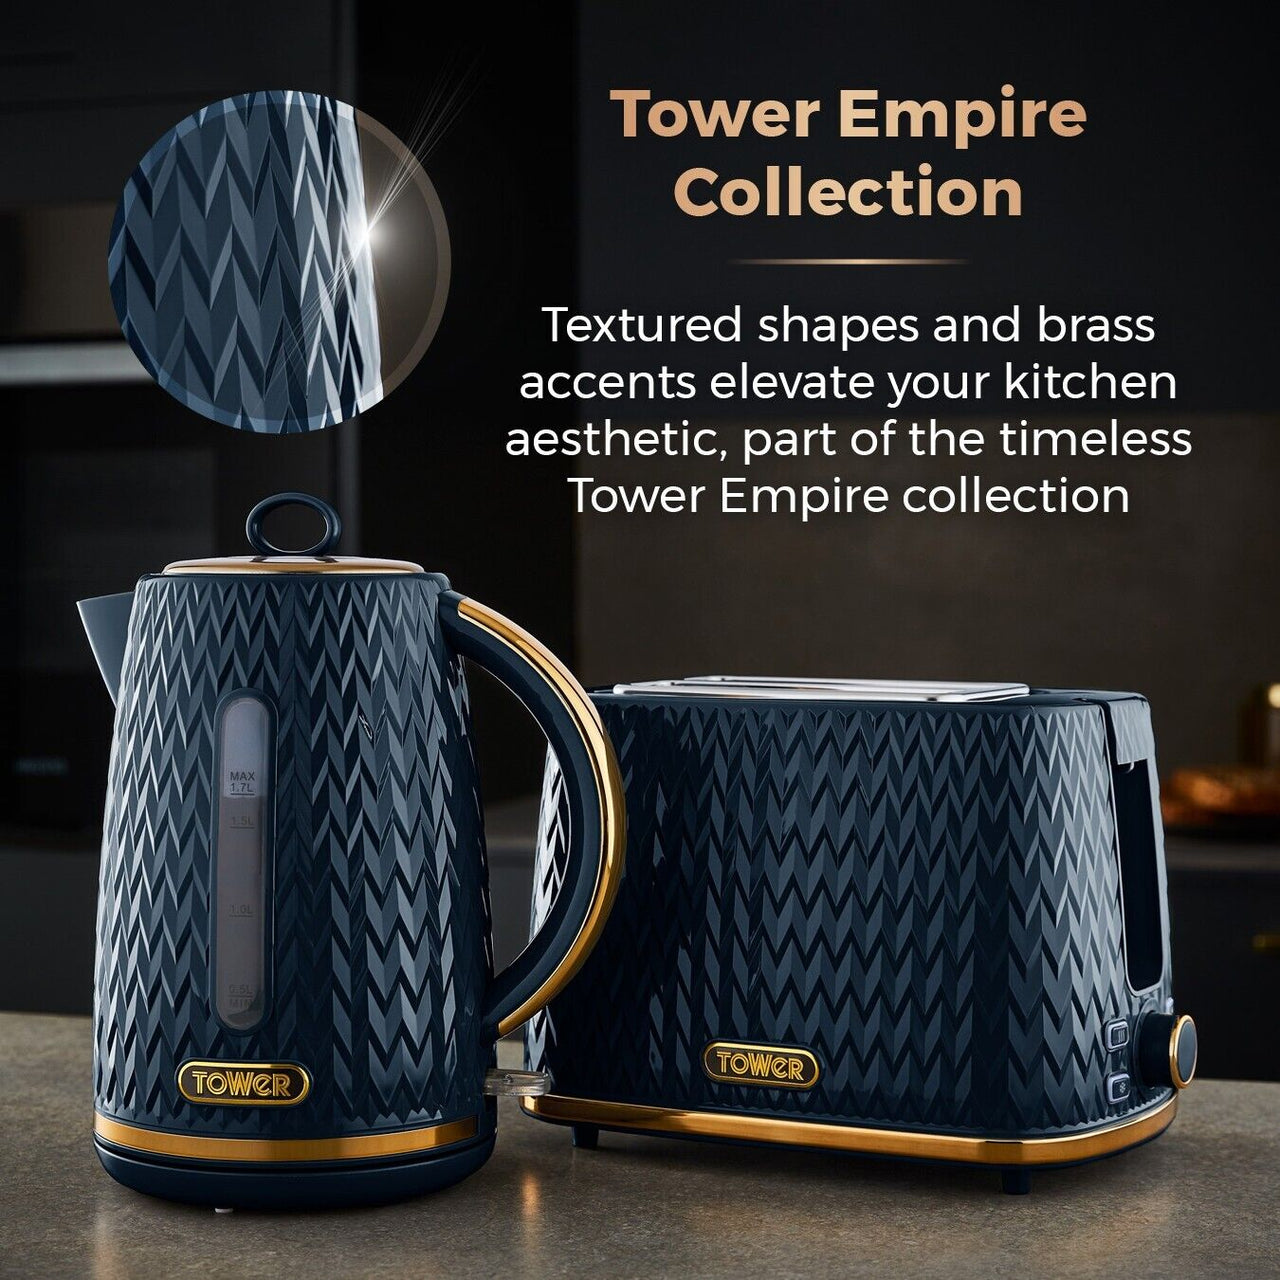 Tower Empire Blue Jug Kettle 2 Slice Toaster Breadbin Canisters Kitchen Set of 6